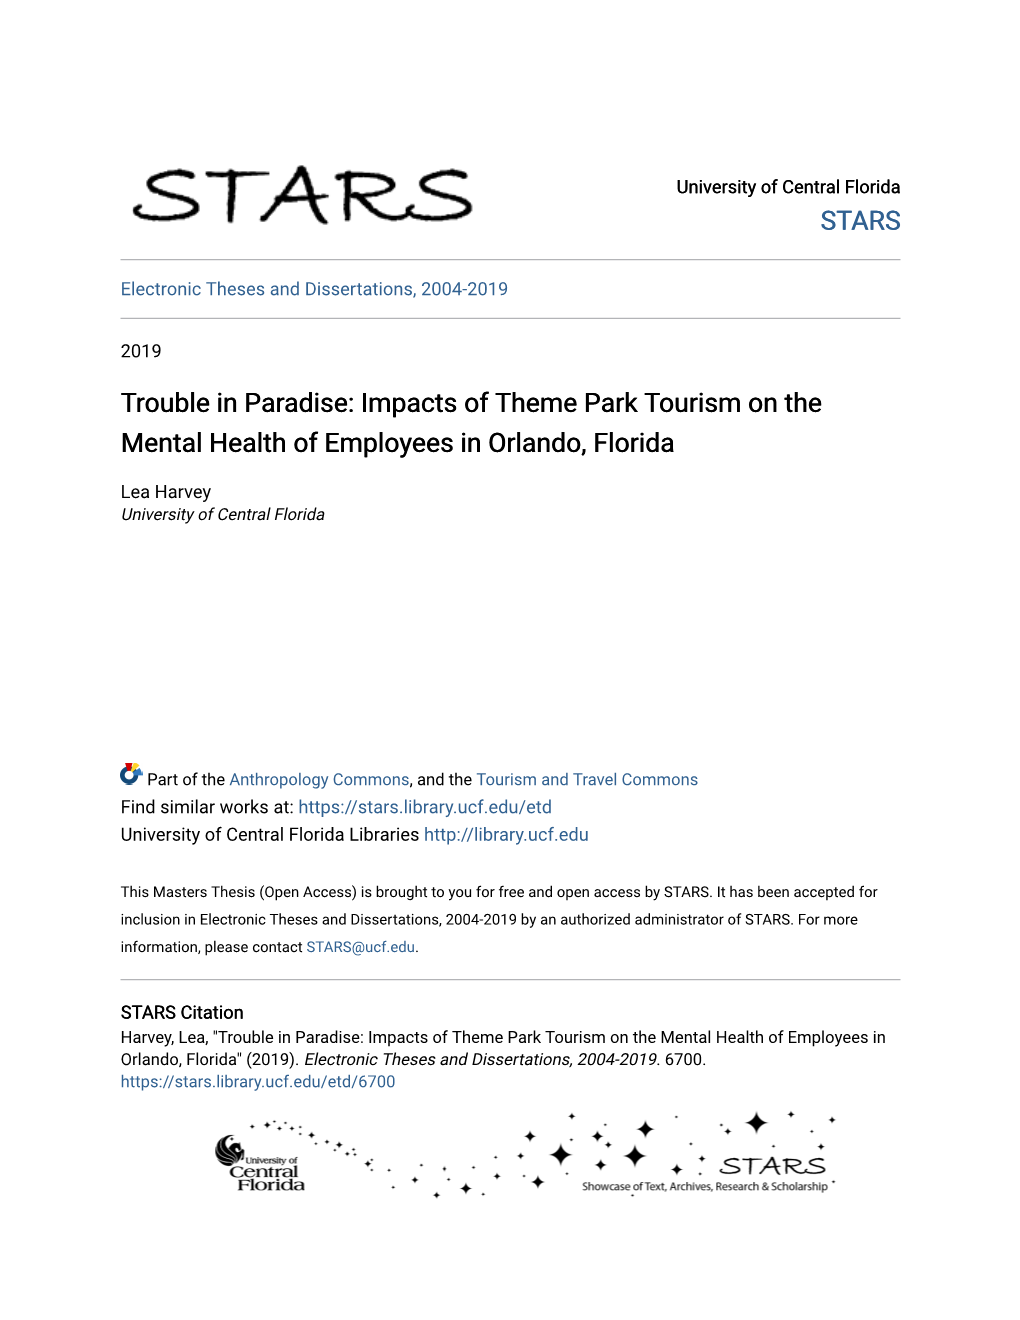 Impacts of Theme Park Tourism on the Mental Health of Employees in Orlando, Florida